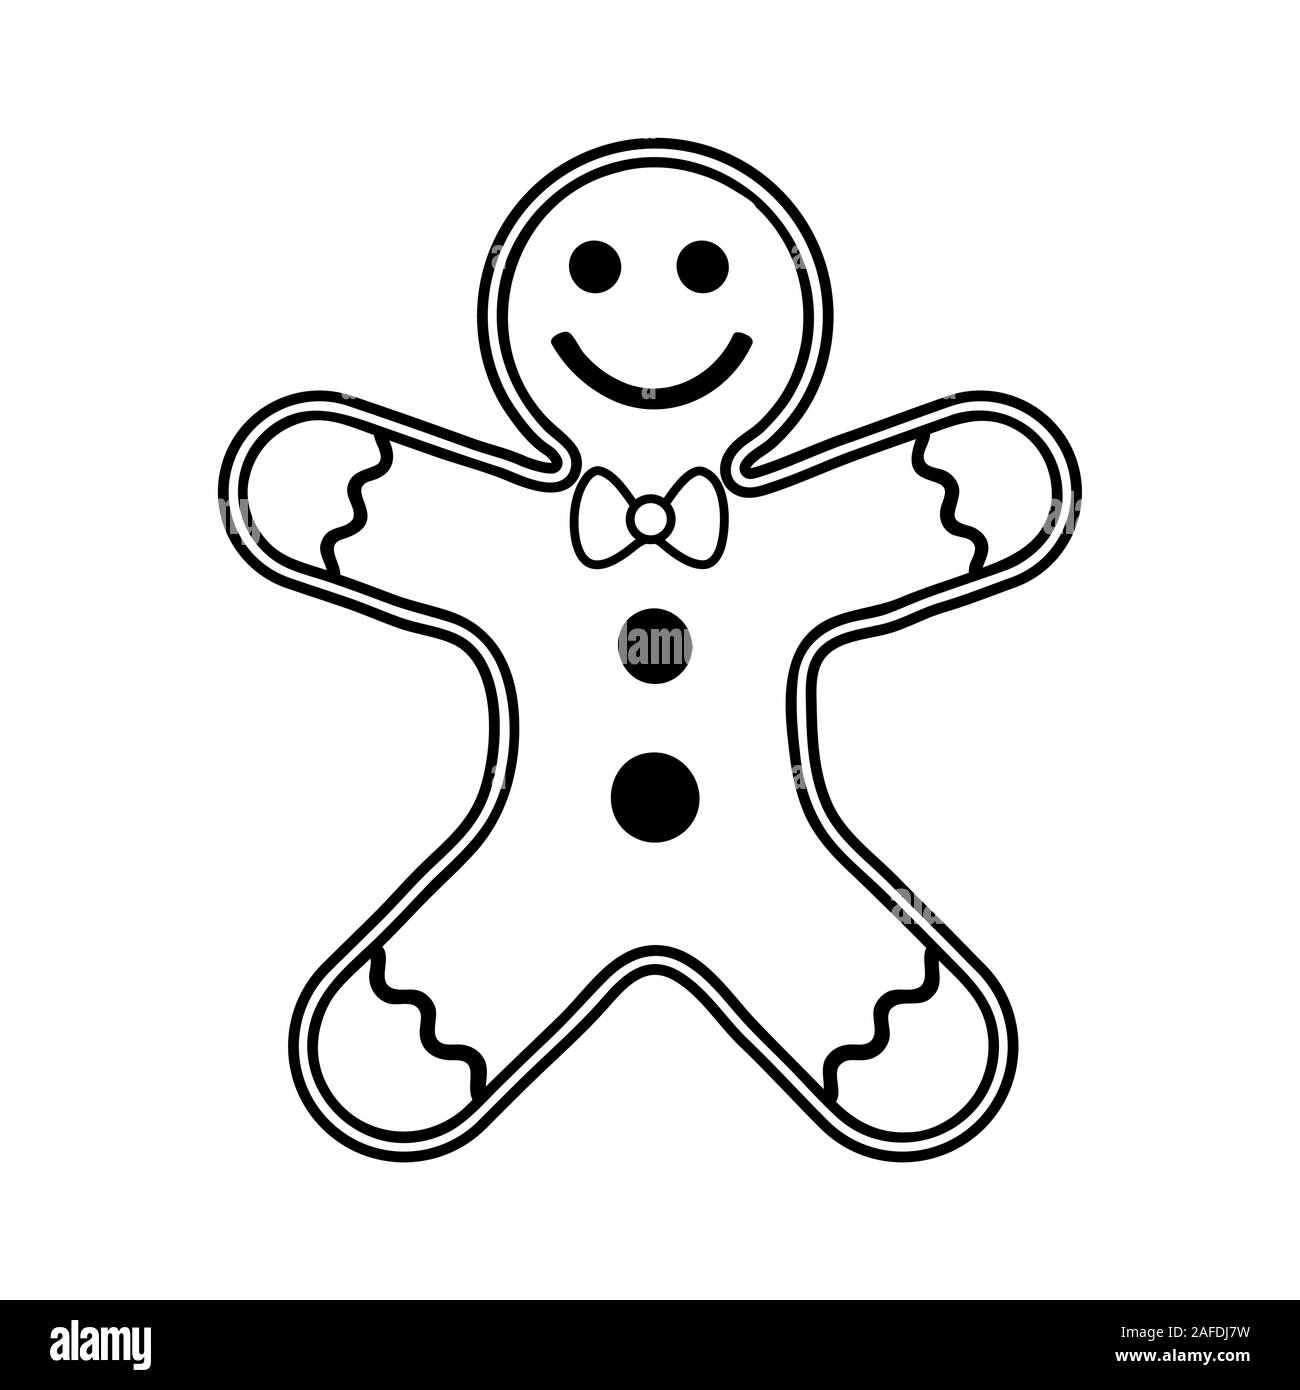 Gingerbread man Christmas cookie outline. New year biscuit ginger man. Cartoon illustration Isolated on white background Stock Vector